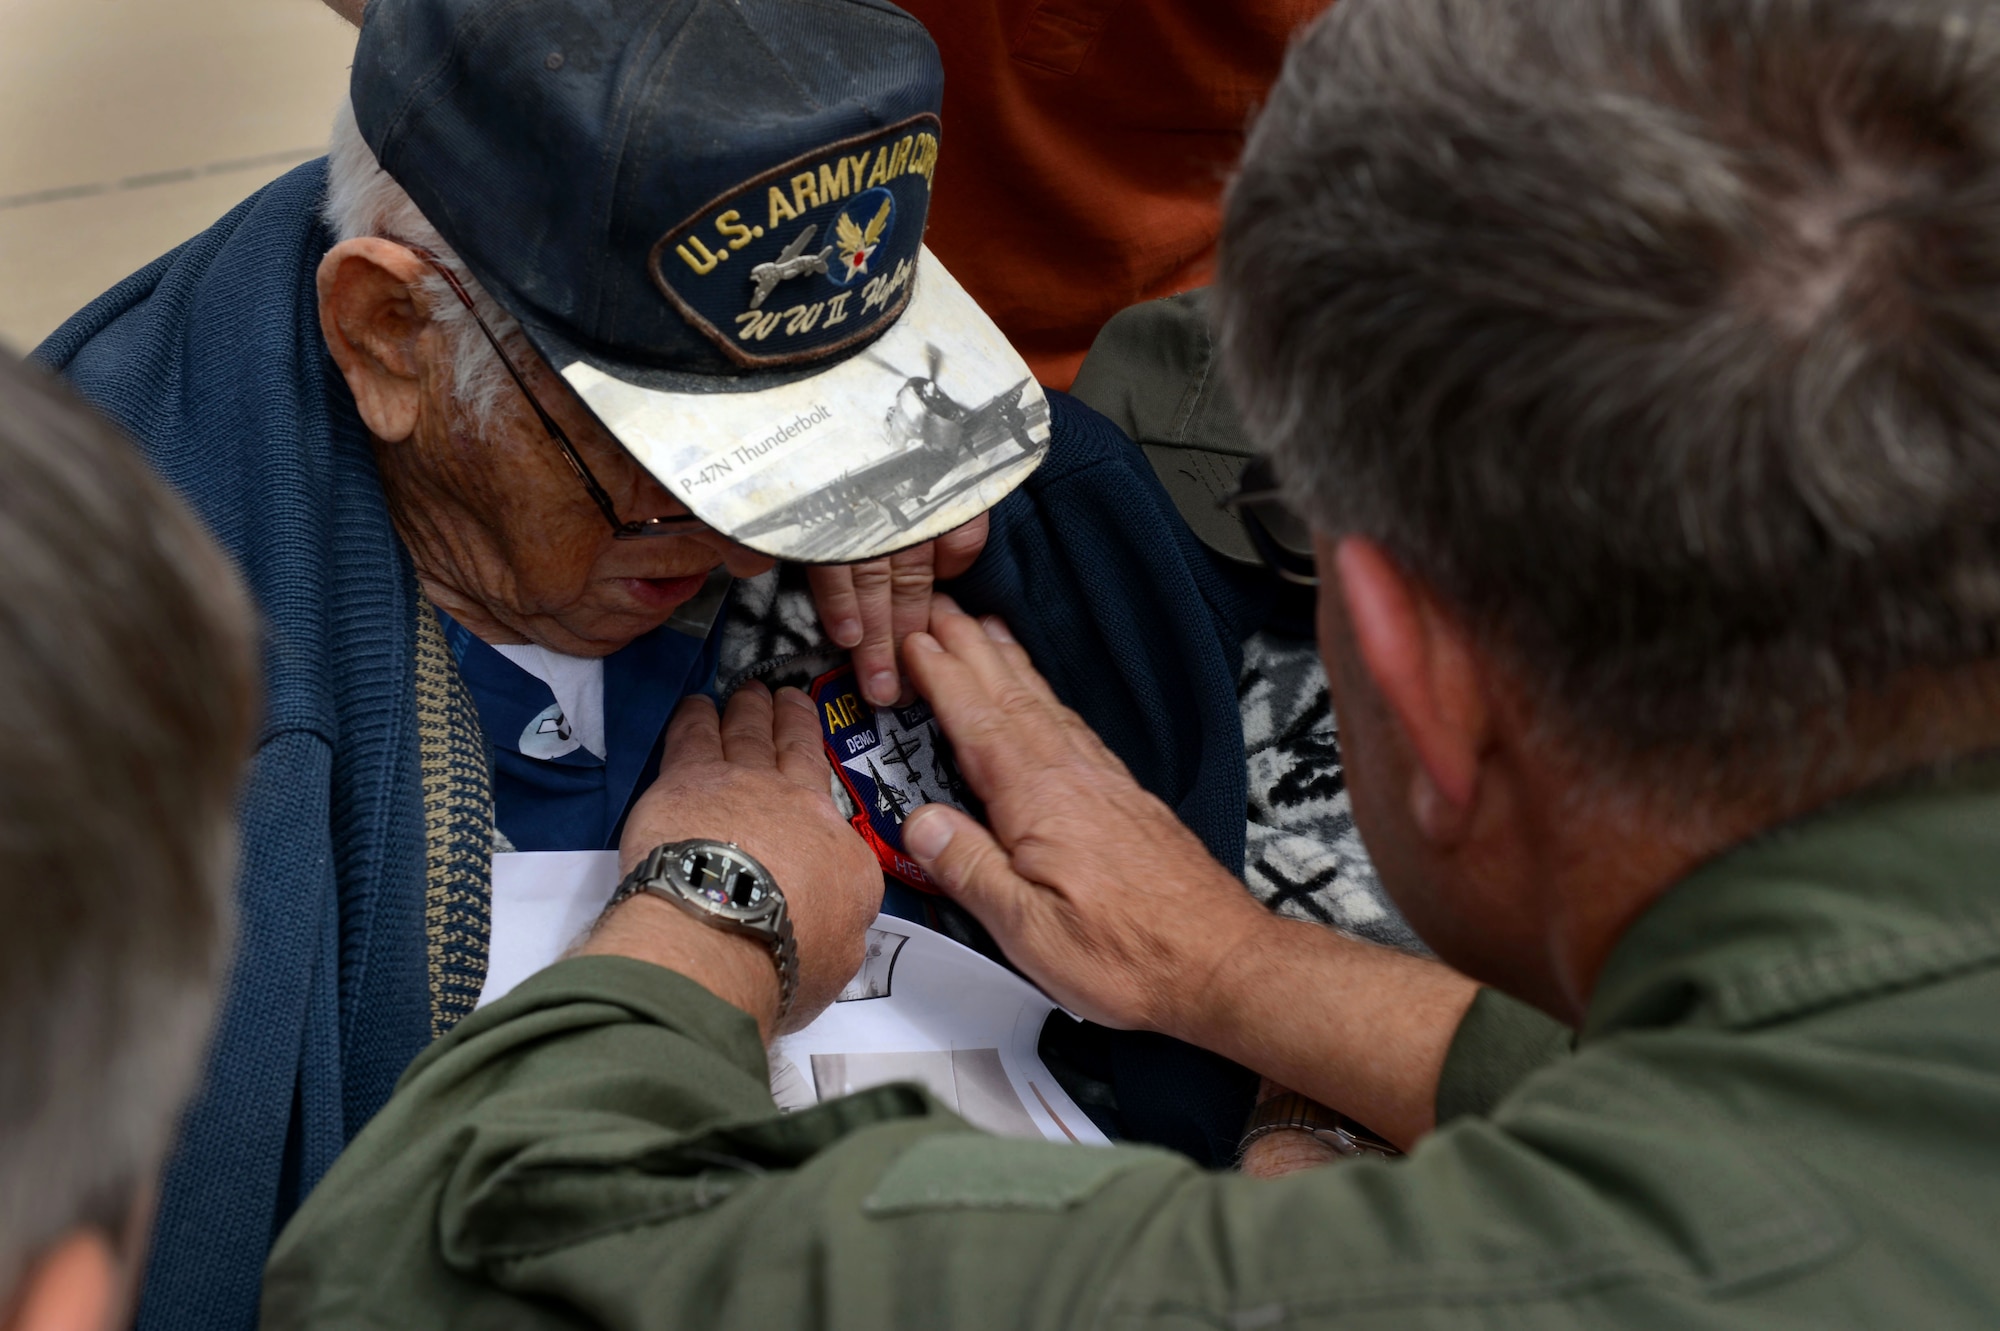 Retired Air National Guard Chief Warrant Officer 2 Robert Hertel, receives a Heritage Flight patch from Tom Gregory, P-47 Thunderbolt HF pilot during the Heritage Flight Training and Certification Course Feb. 28, 2015, at Davis-Monthan Air Force Base, Ariz. Hertel, a 92-year-old veteran, flew the Thunderbolt during World War II and had not seen one since his retirement in the 1960's. (U.S. Air Force photo/Senior Airman Jensen Stidham)